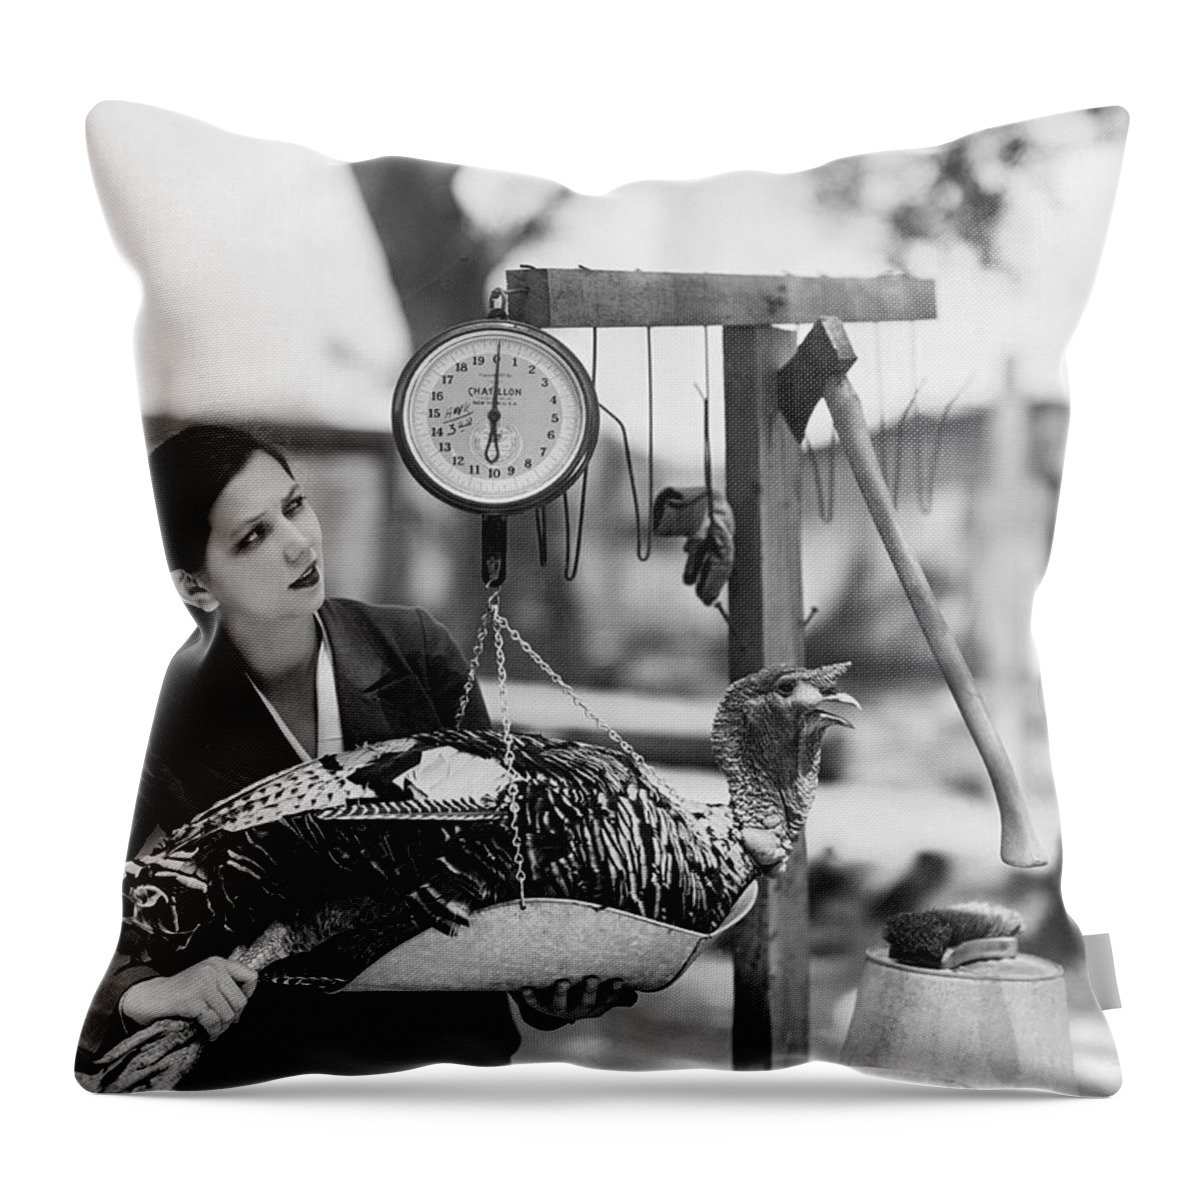 1935 Throw Pillow featuring the photograph Turkey Day Coming Up by Stax